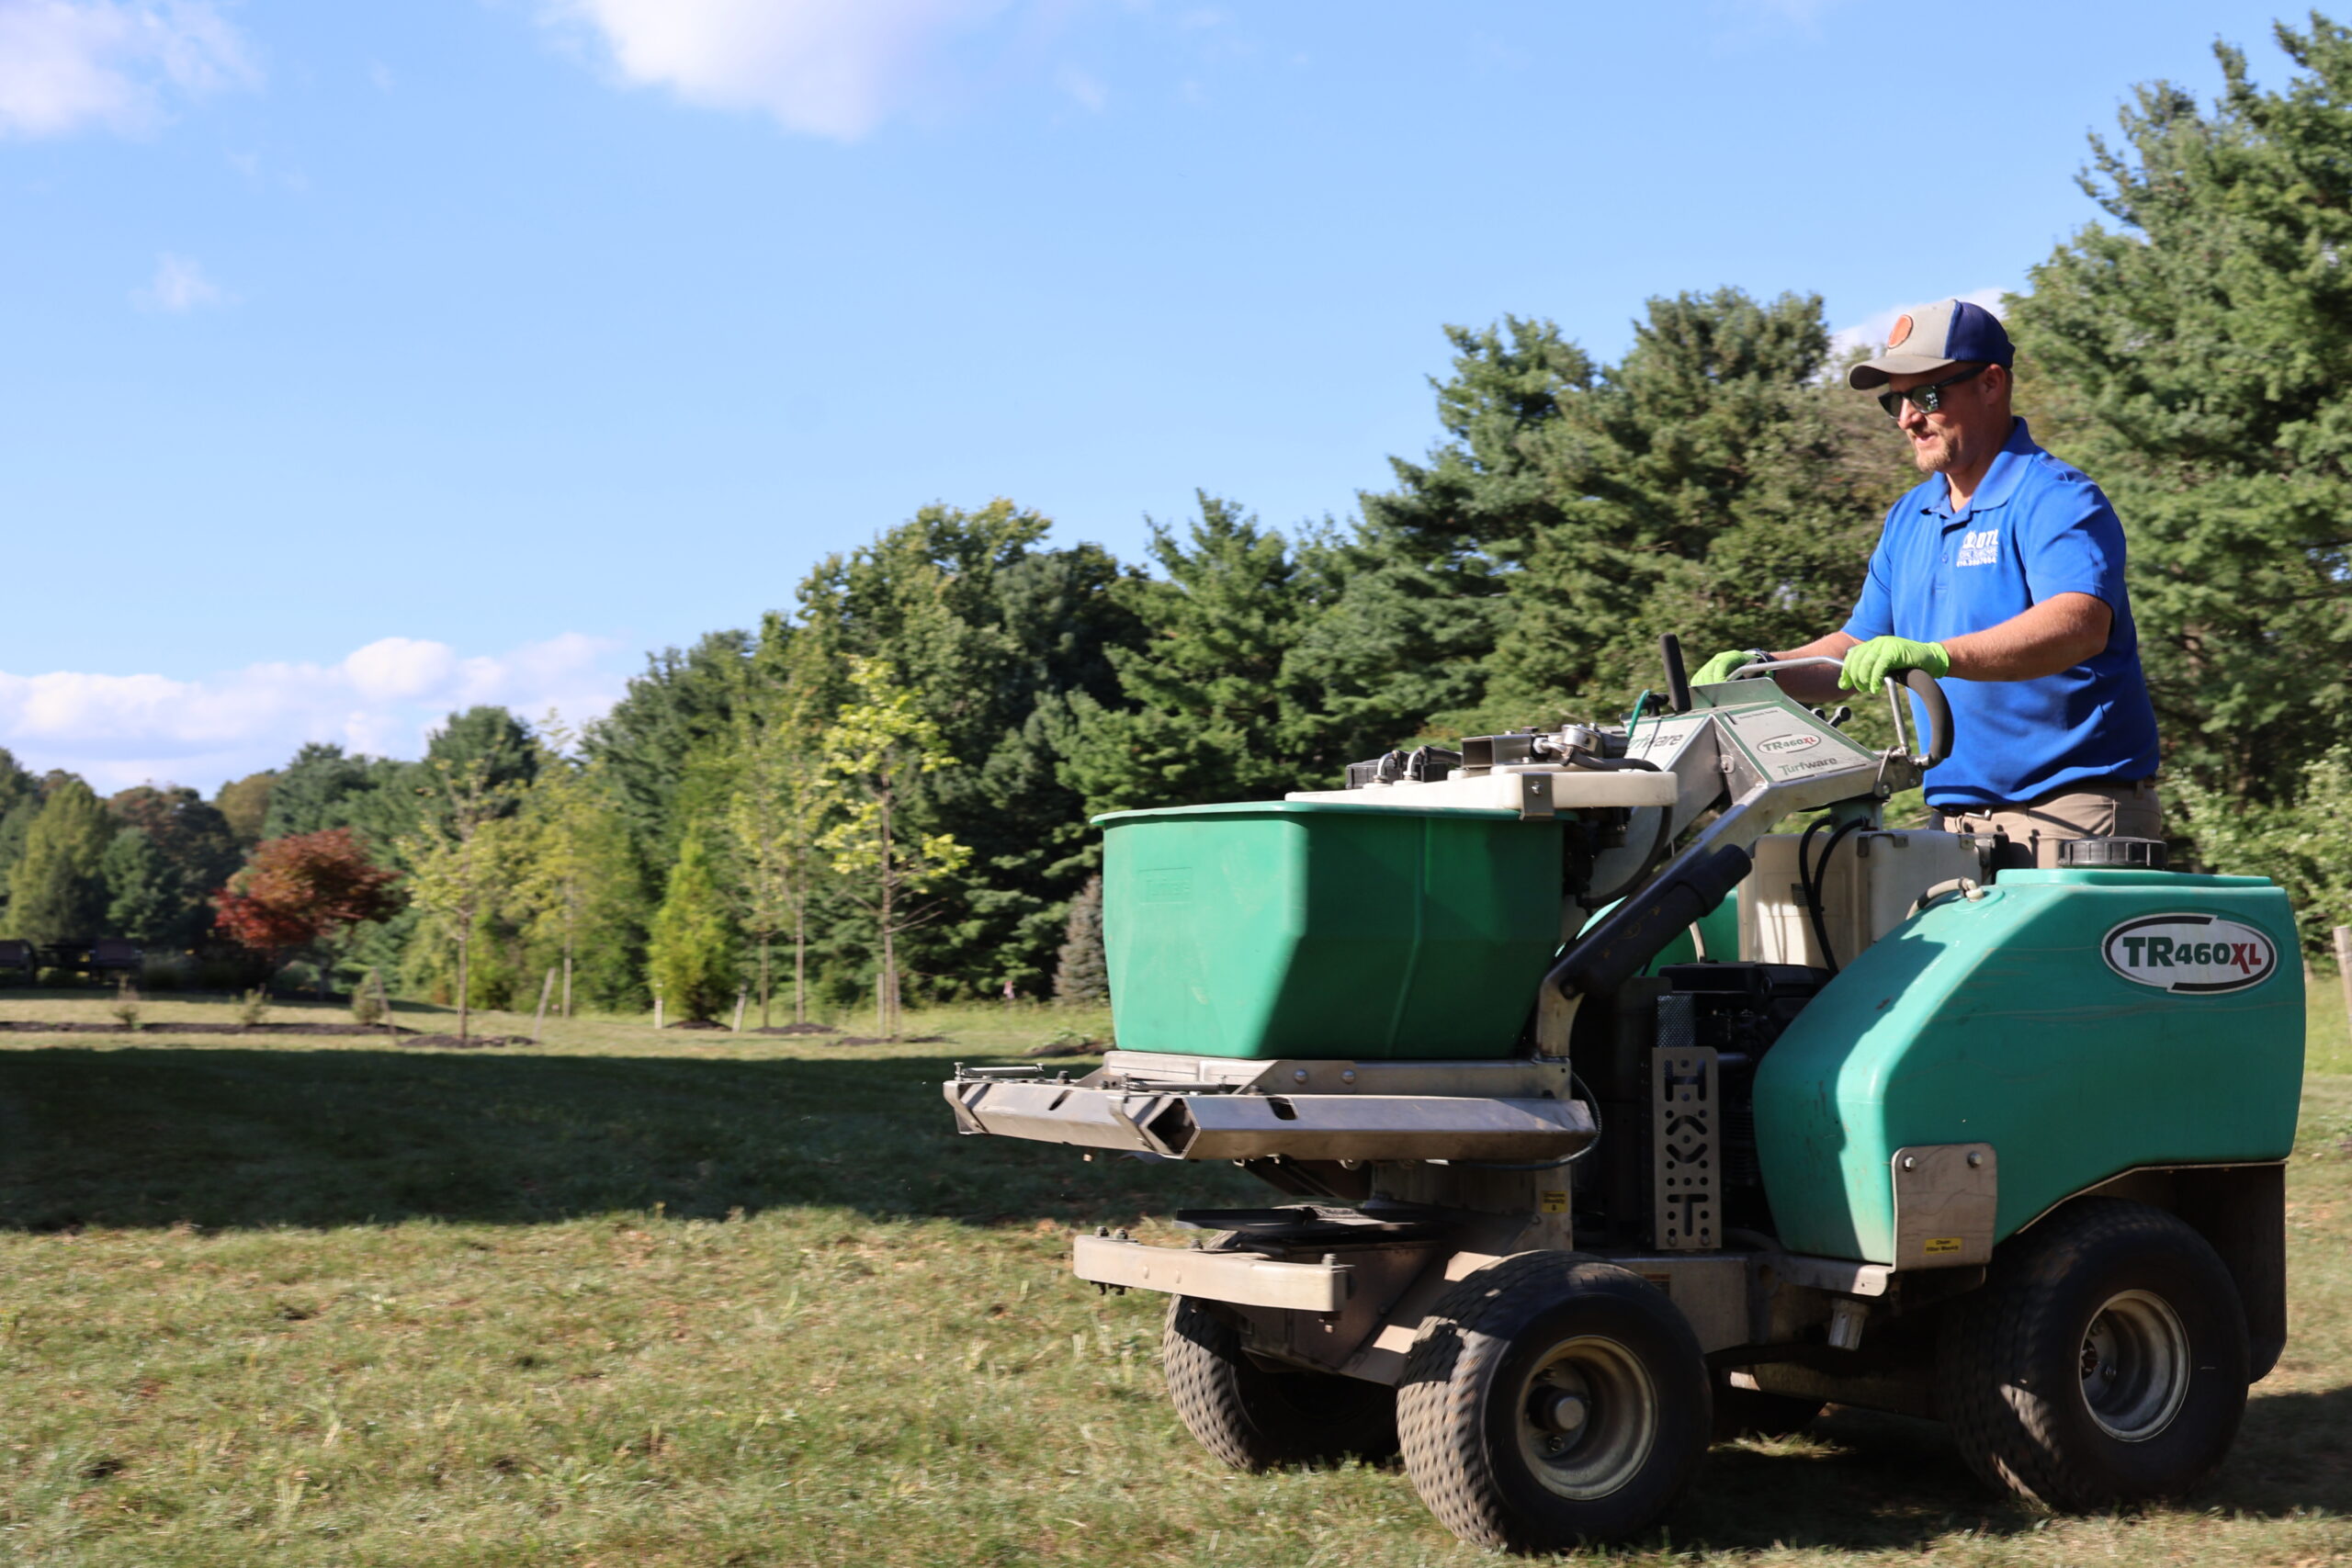 DTL Total Turf Care offers Lawn Aeration and Overseeding services